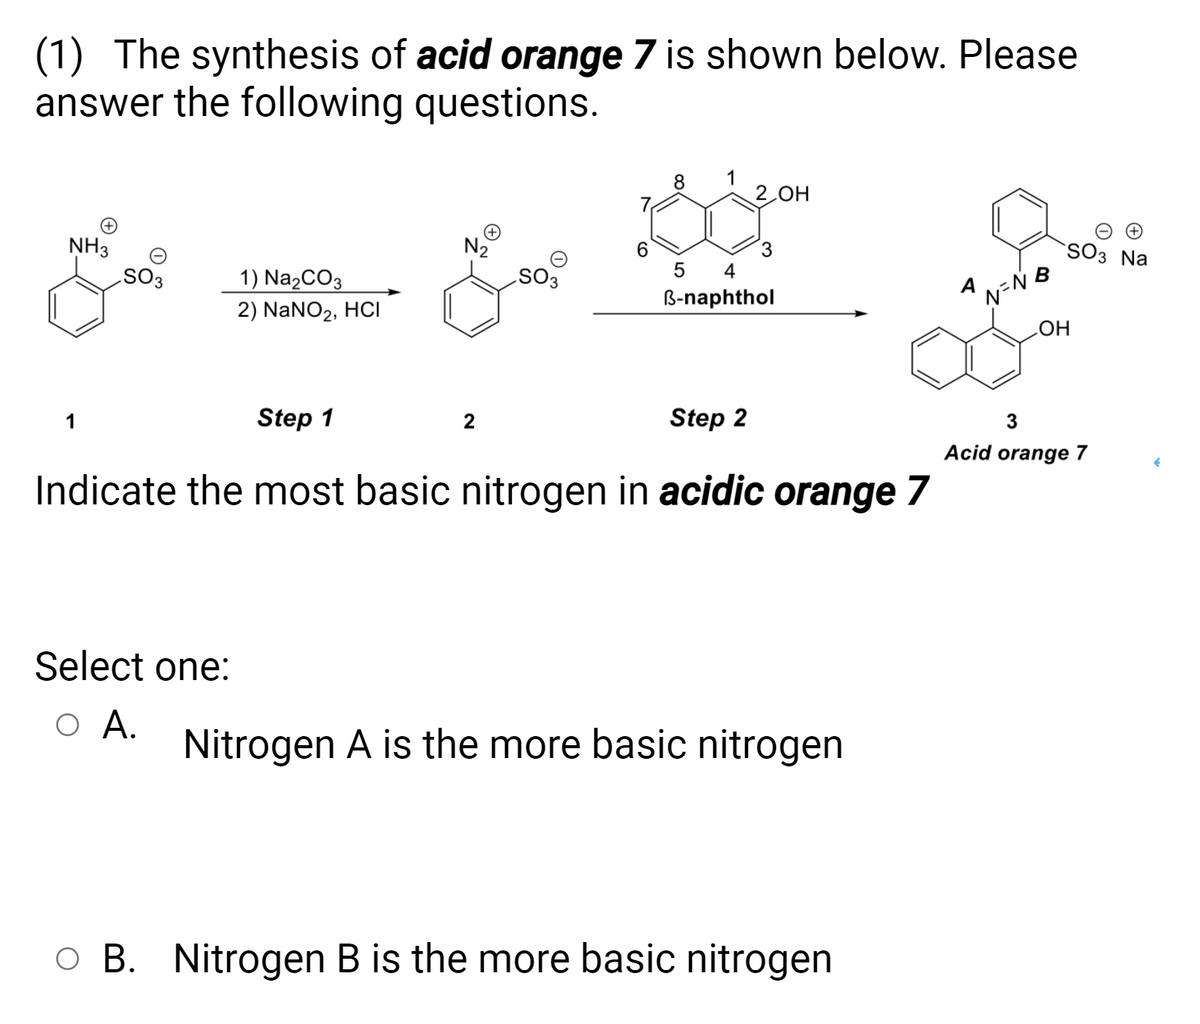 (1) The synthesis of acid orange 7 is shown below. Please
answer the following questions.
1
2 OH
NH3
N2
SO3 Na
6.
1) NazCO3
2) NaNO2, HCI
A
OS
B-naphthol
1
Step 1
Step 2
Acid orange 7
Indicate the most basic nitrogen in acidic orange 7
Select one:
O A.
Nitrogen A is the more basic nitrogen
O B. Nitrogen B is the more basic nitrogen
